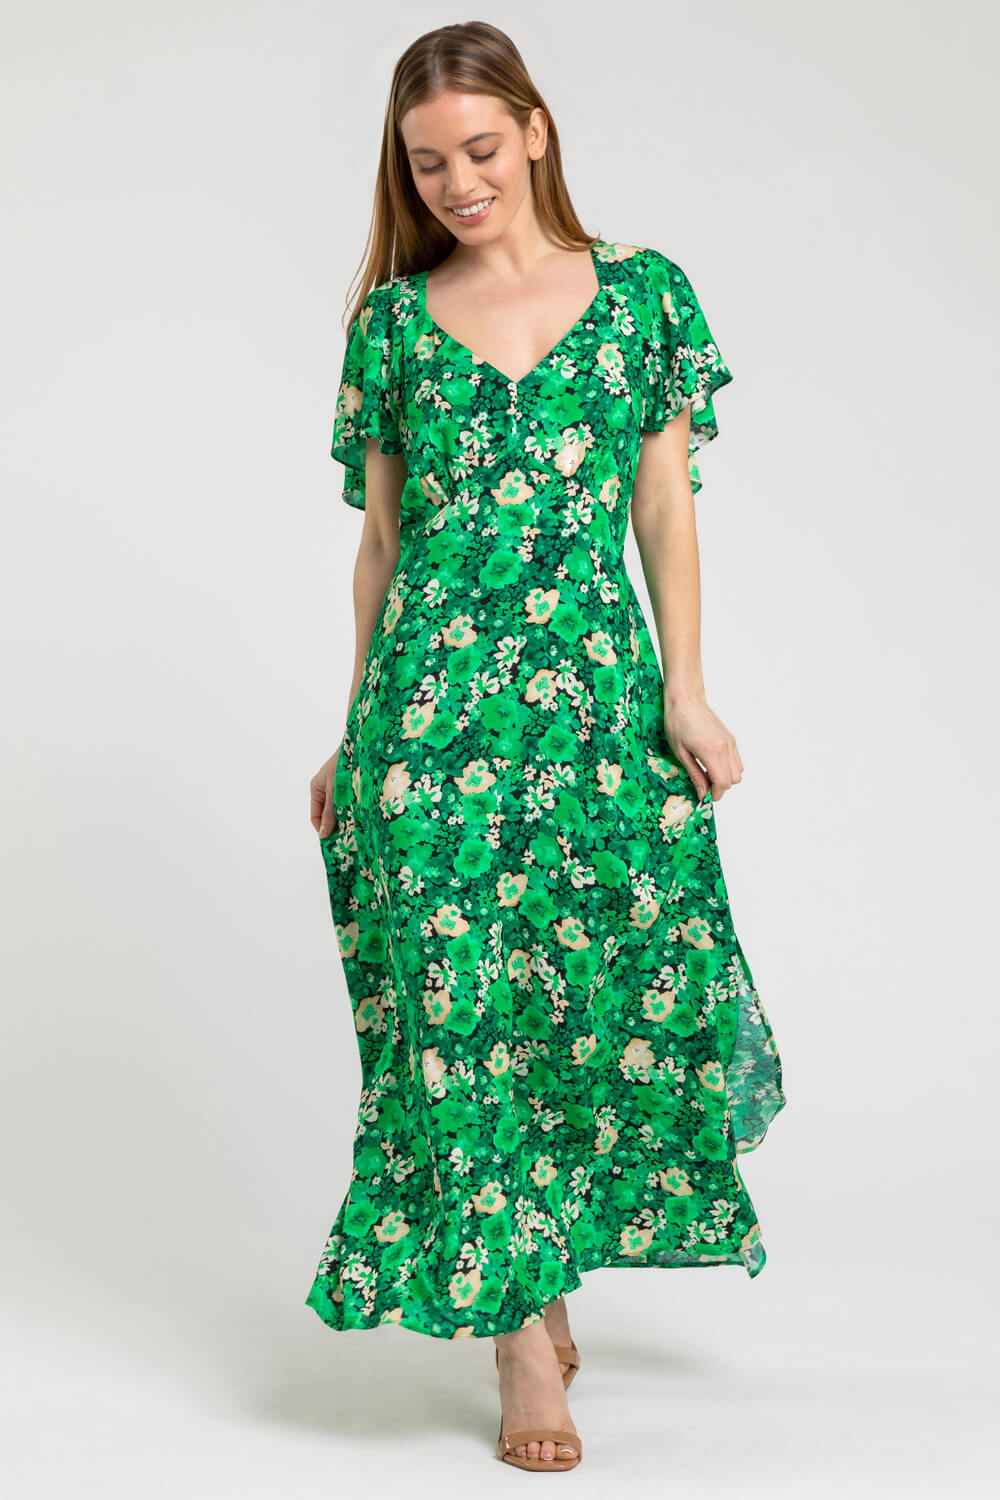 Green Petite Ditsy Floral Print Maxi Dress, Image 5 of 5